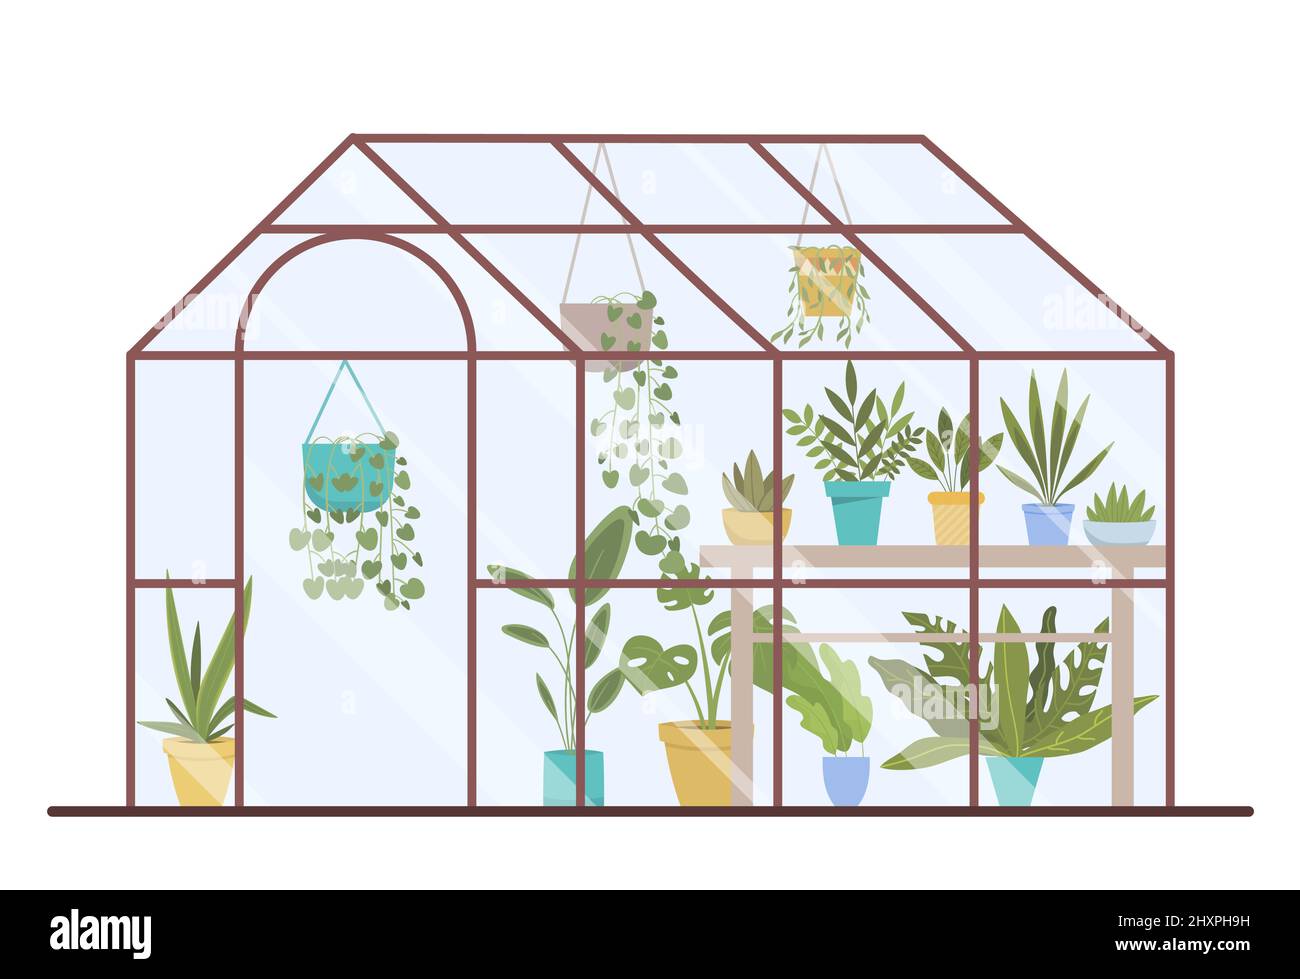 Greenhouse with plants Stock Vector